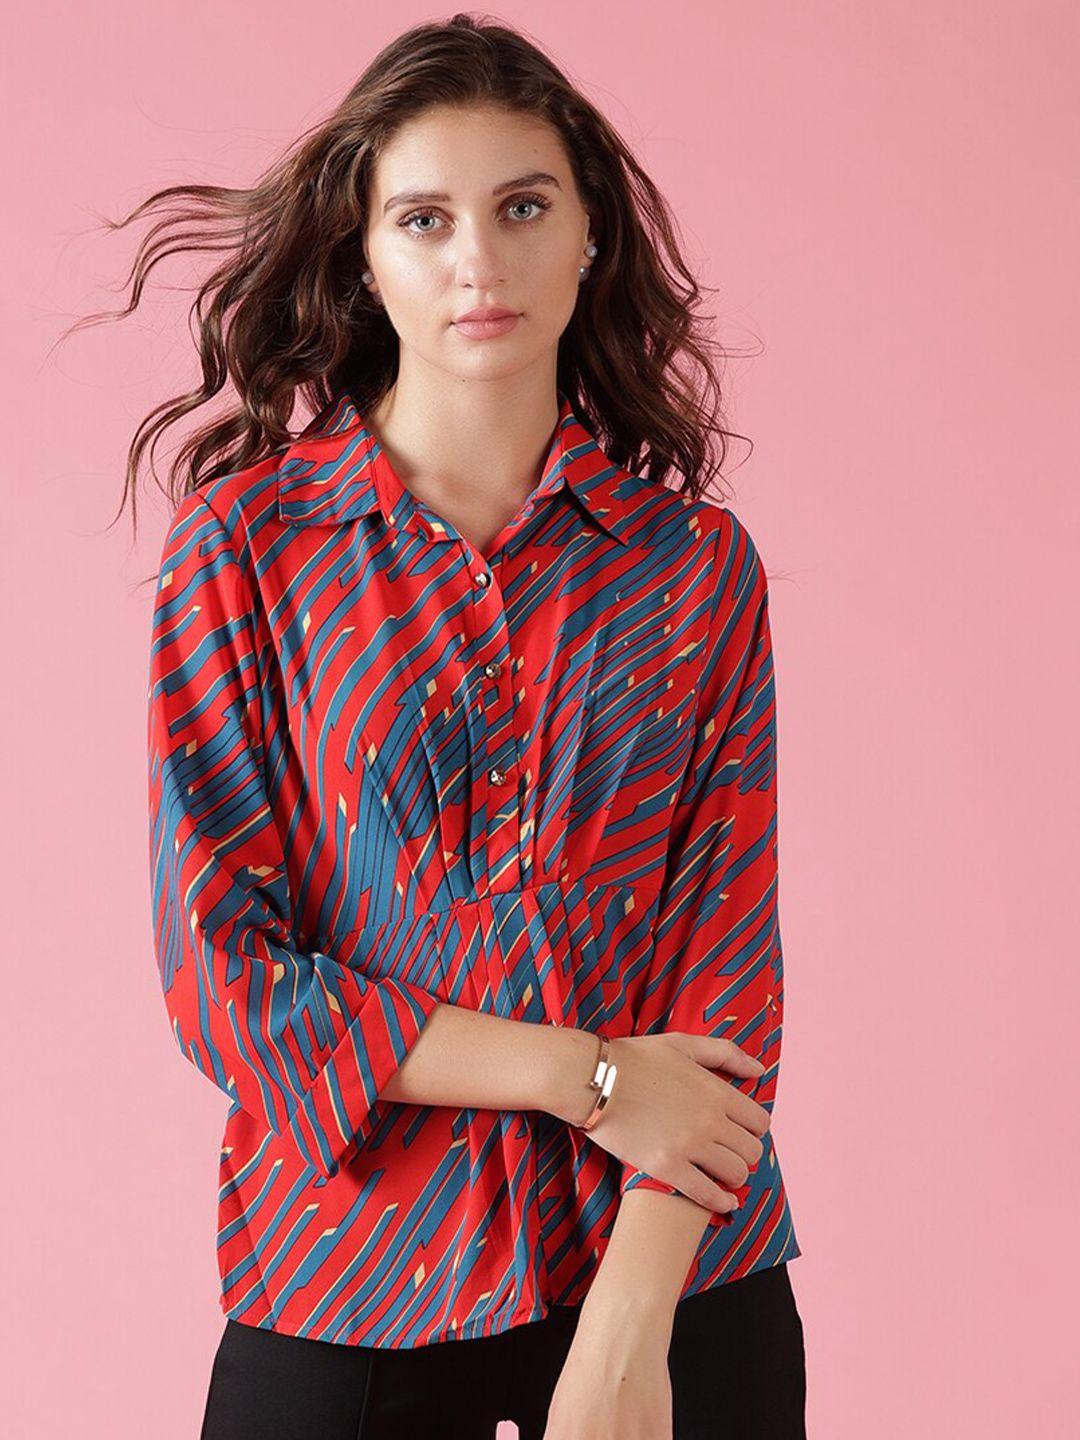 gipsy women red & blue geometric striped polyester shirt style top